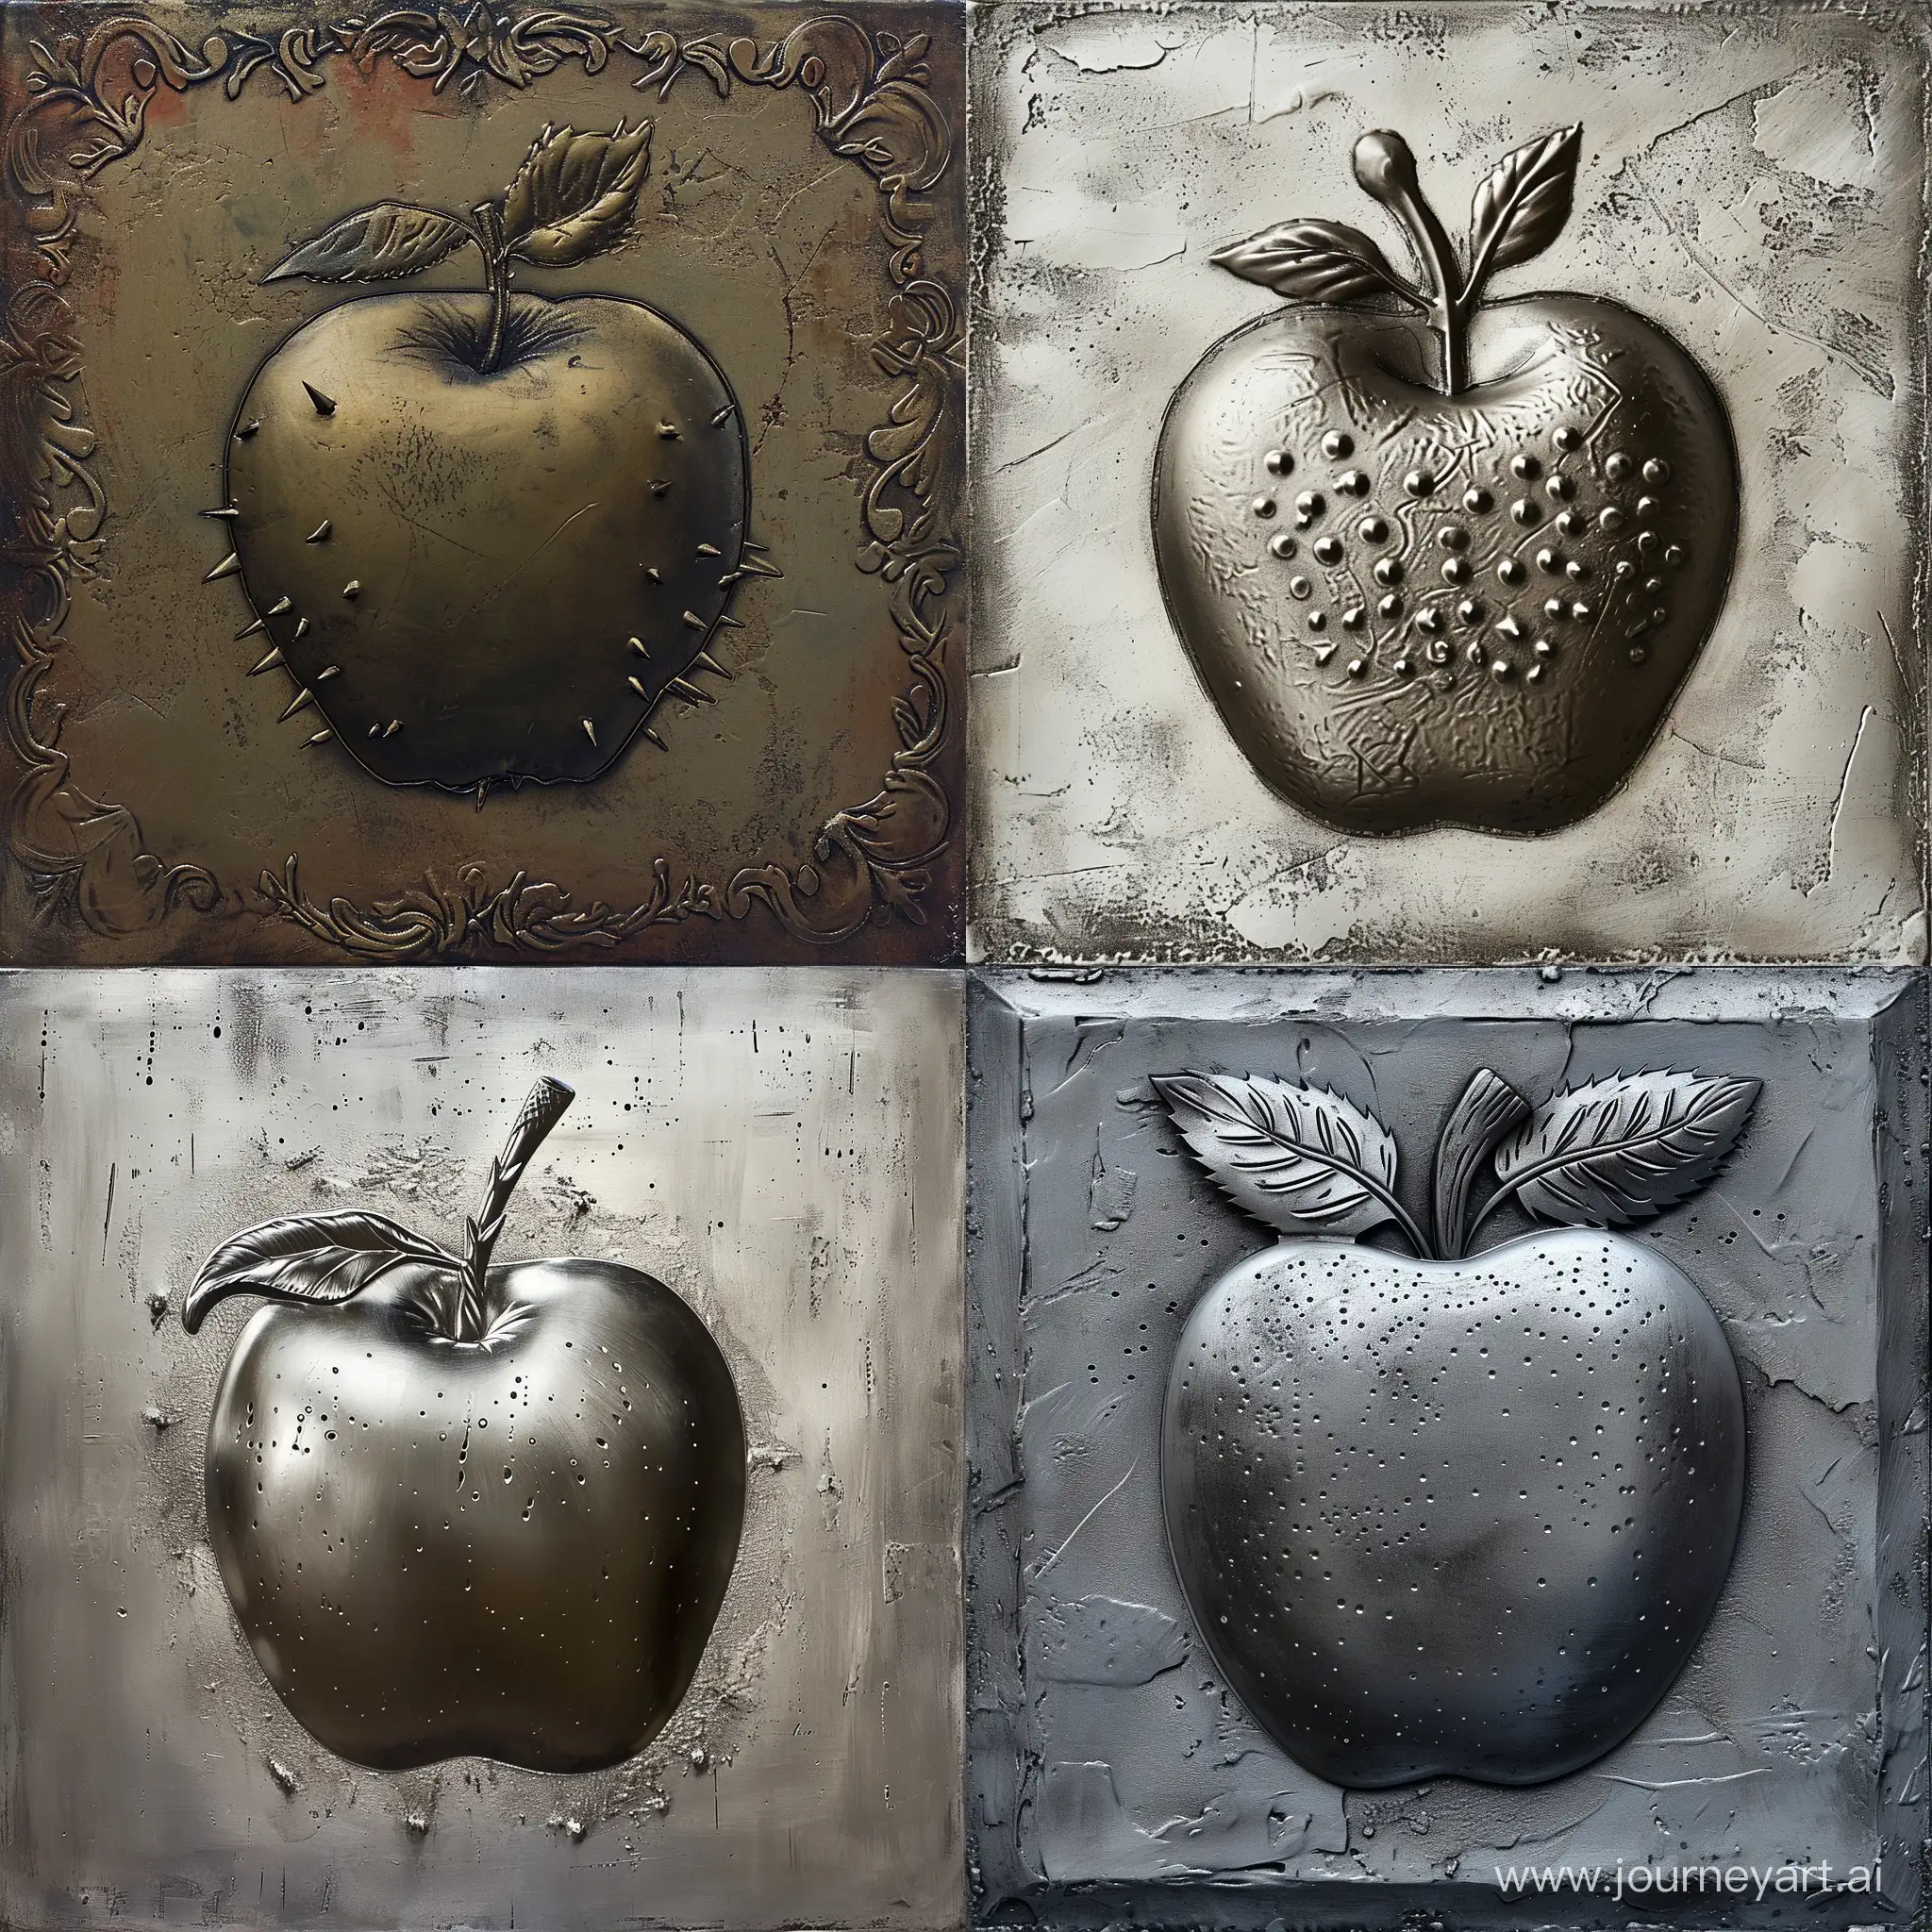 Spiked-Apple-Engraved-on-Smooth-Metal-Panel